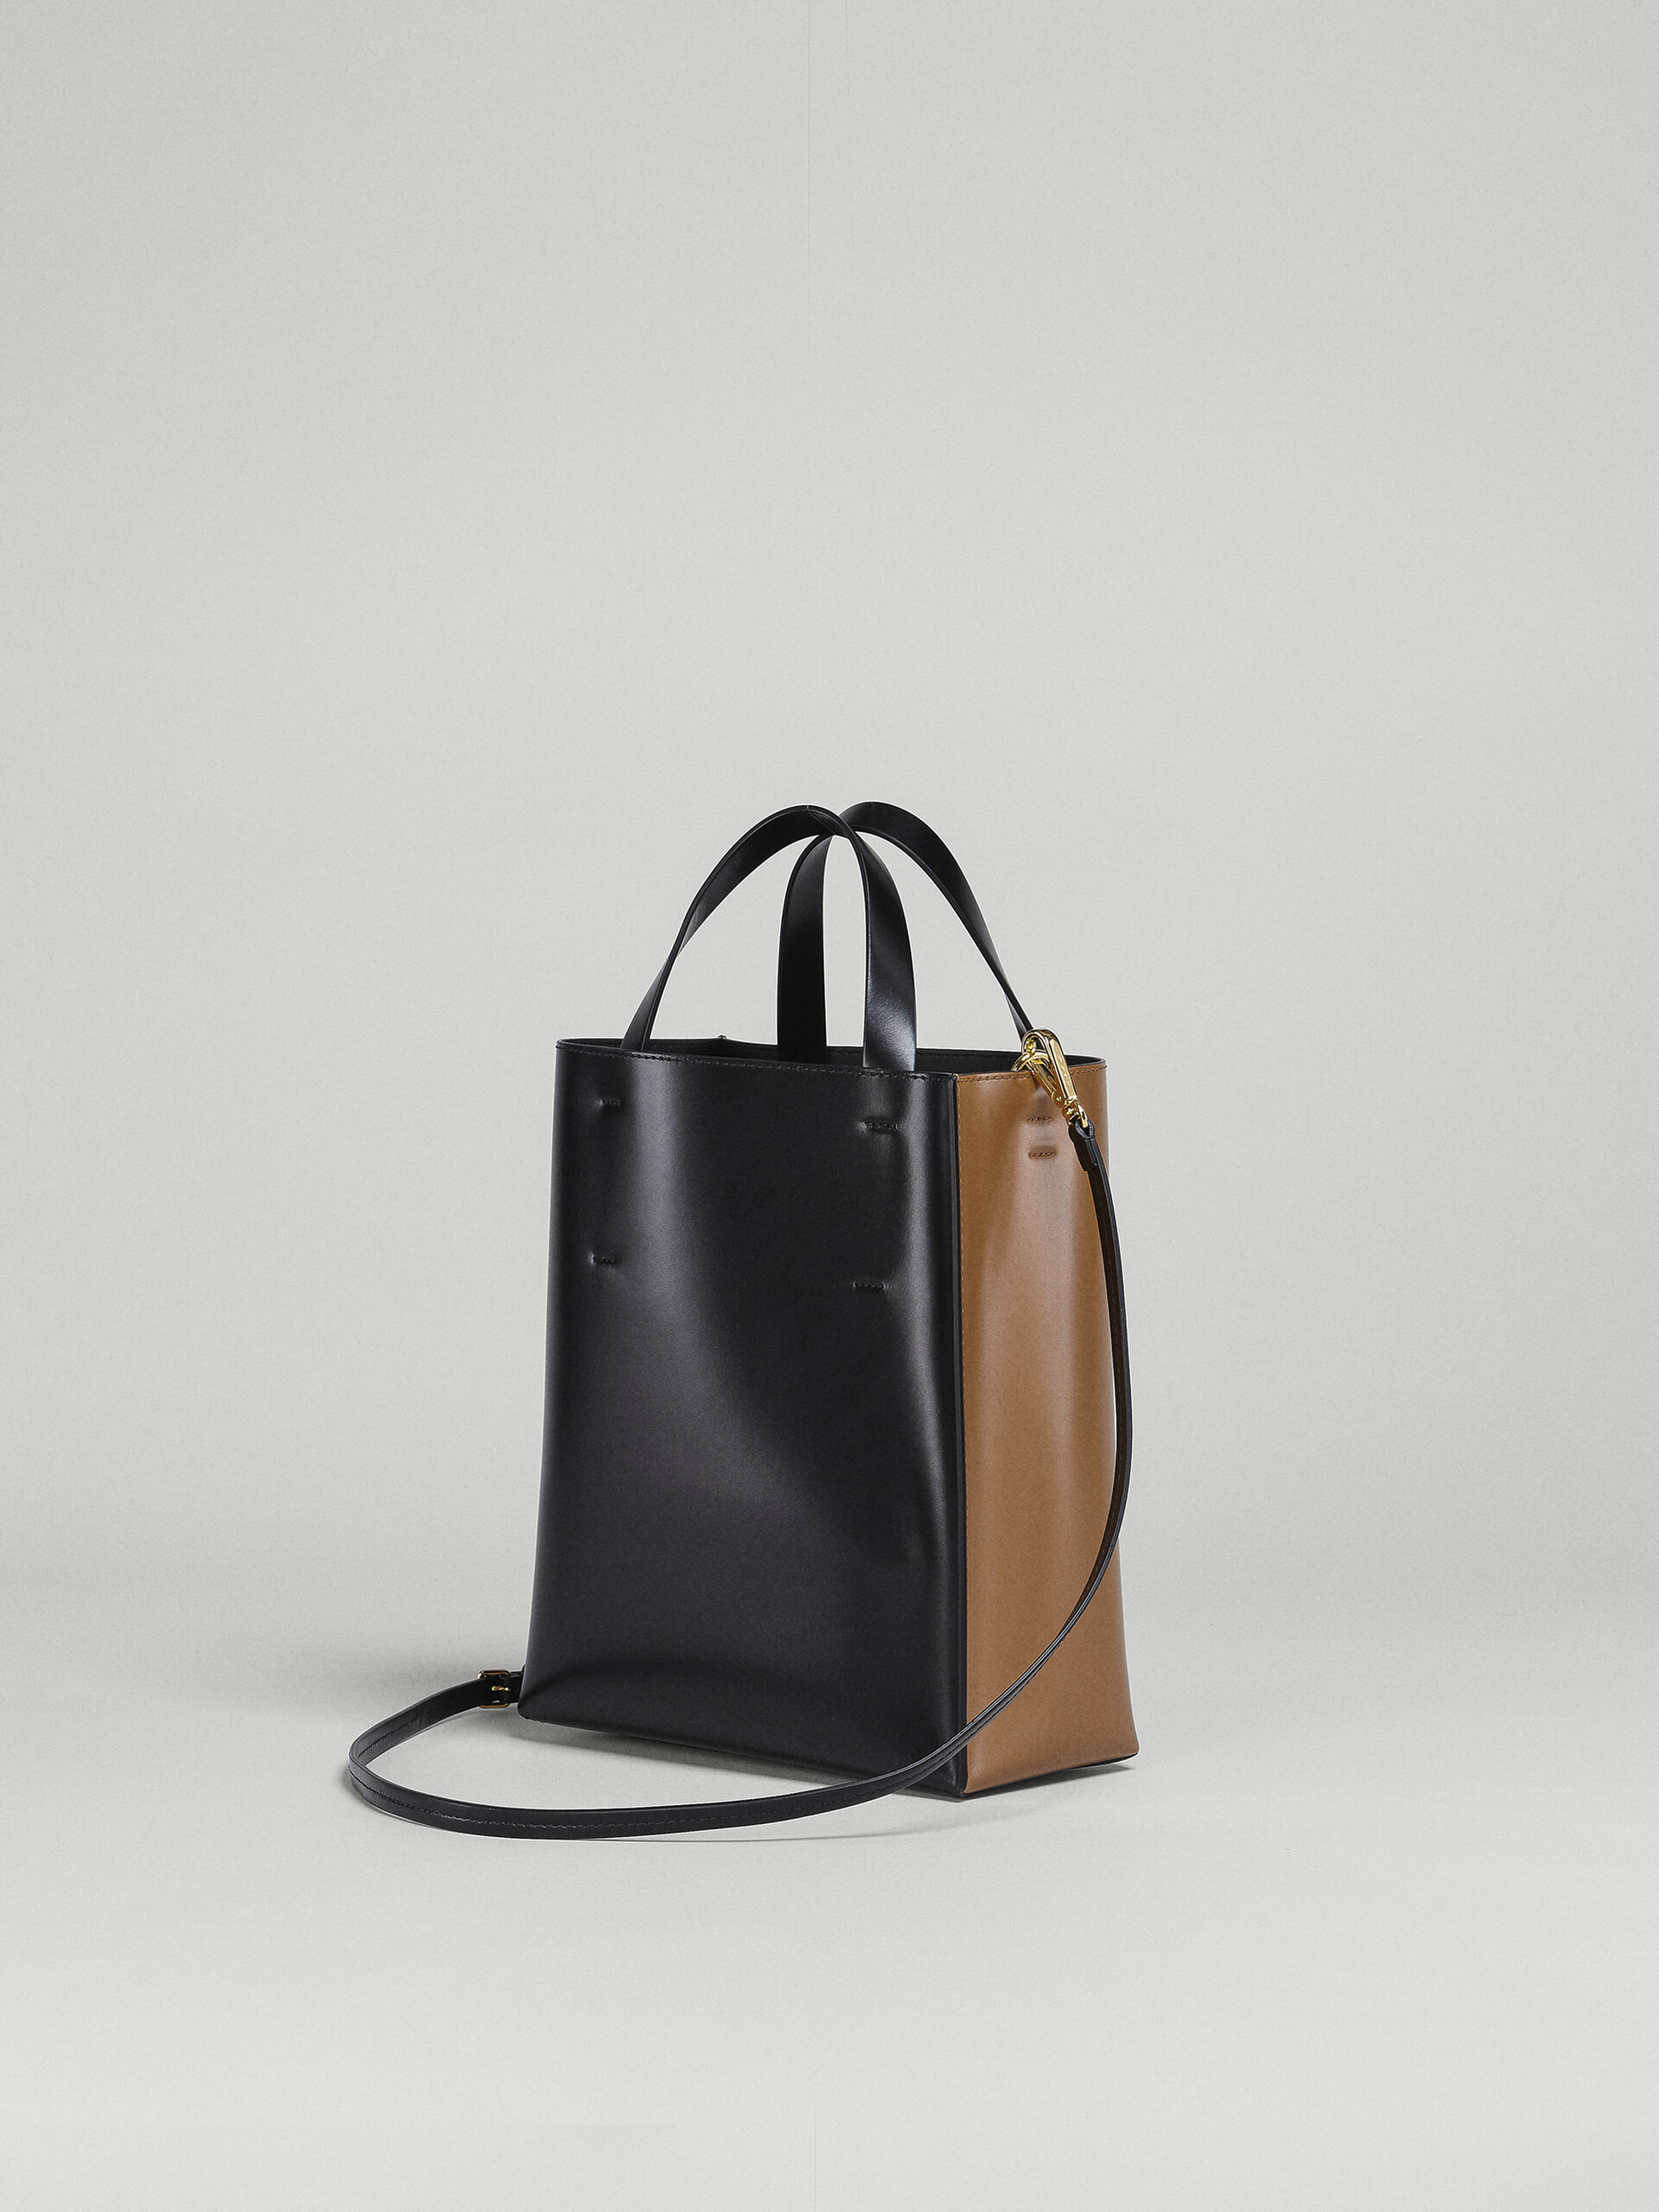 MUSEO small bag in brown and black leather | Marni